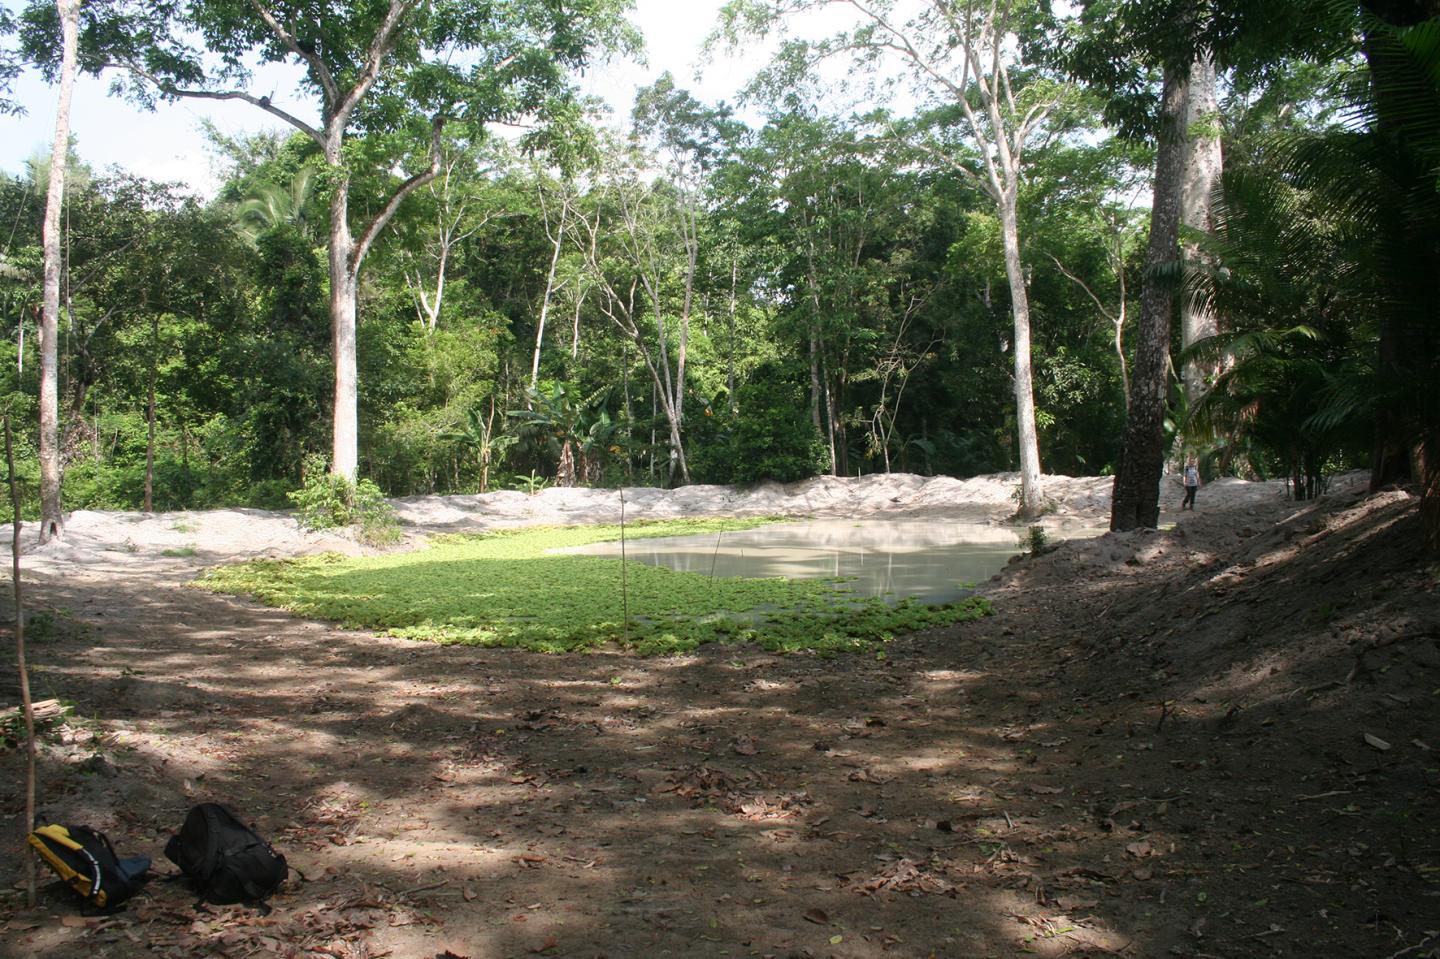 Water Storage Made Prehistoric Settlement Expansion Possible in Amazonia (1 of 3)